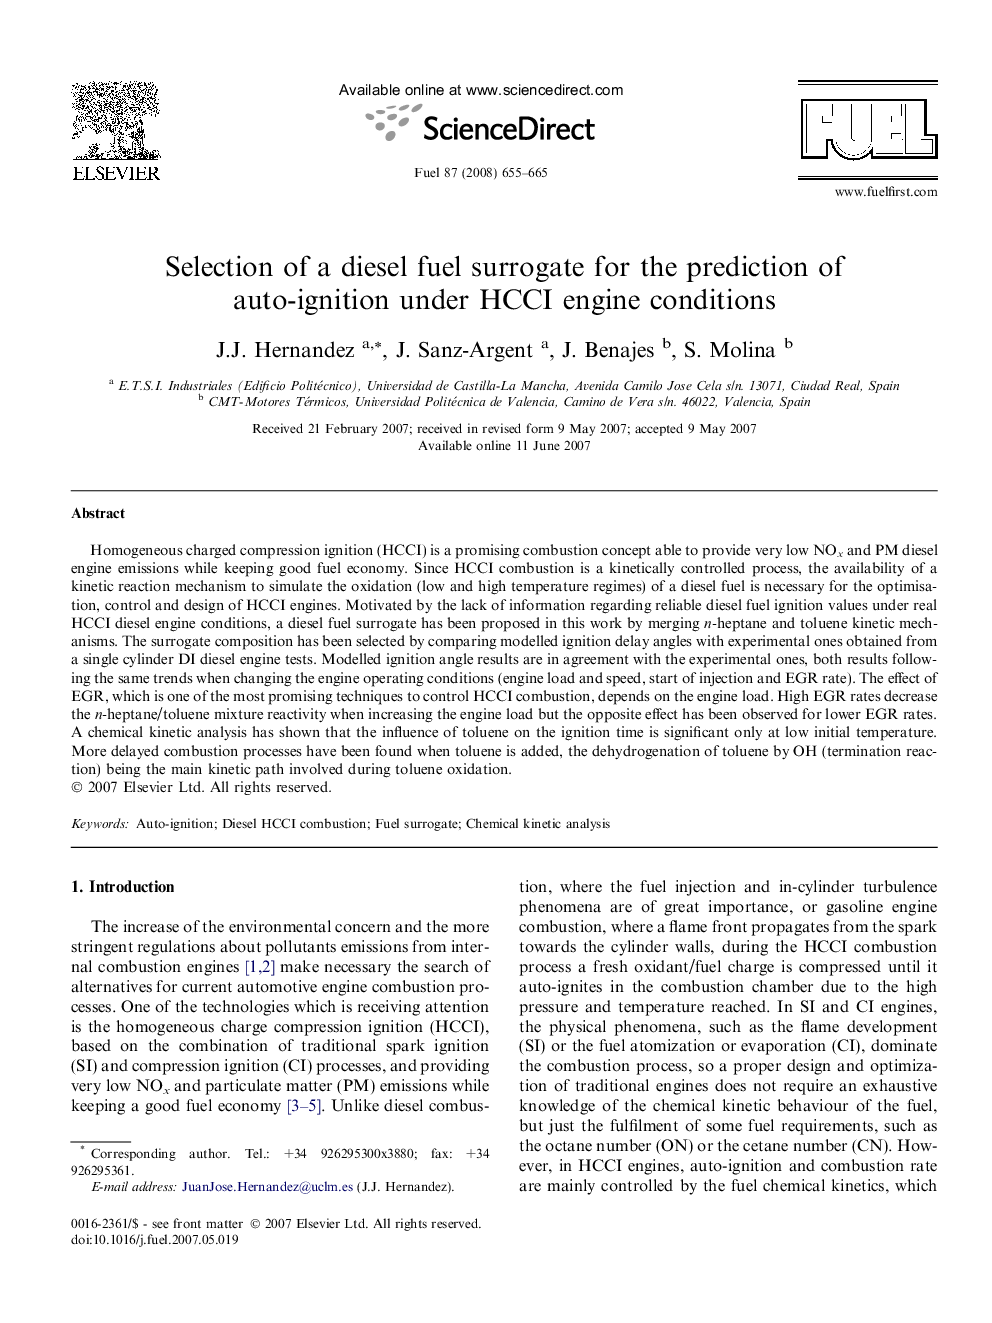 Selection of a diesel fuel surrogate for the prediction of auto-ignition under HCCI engine conditions